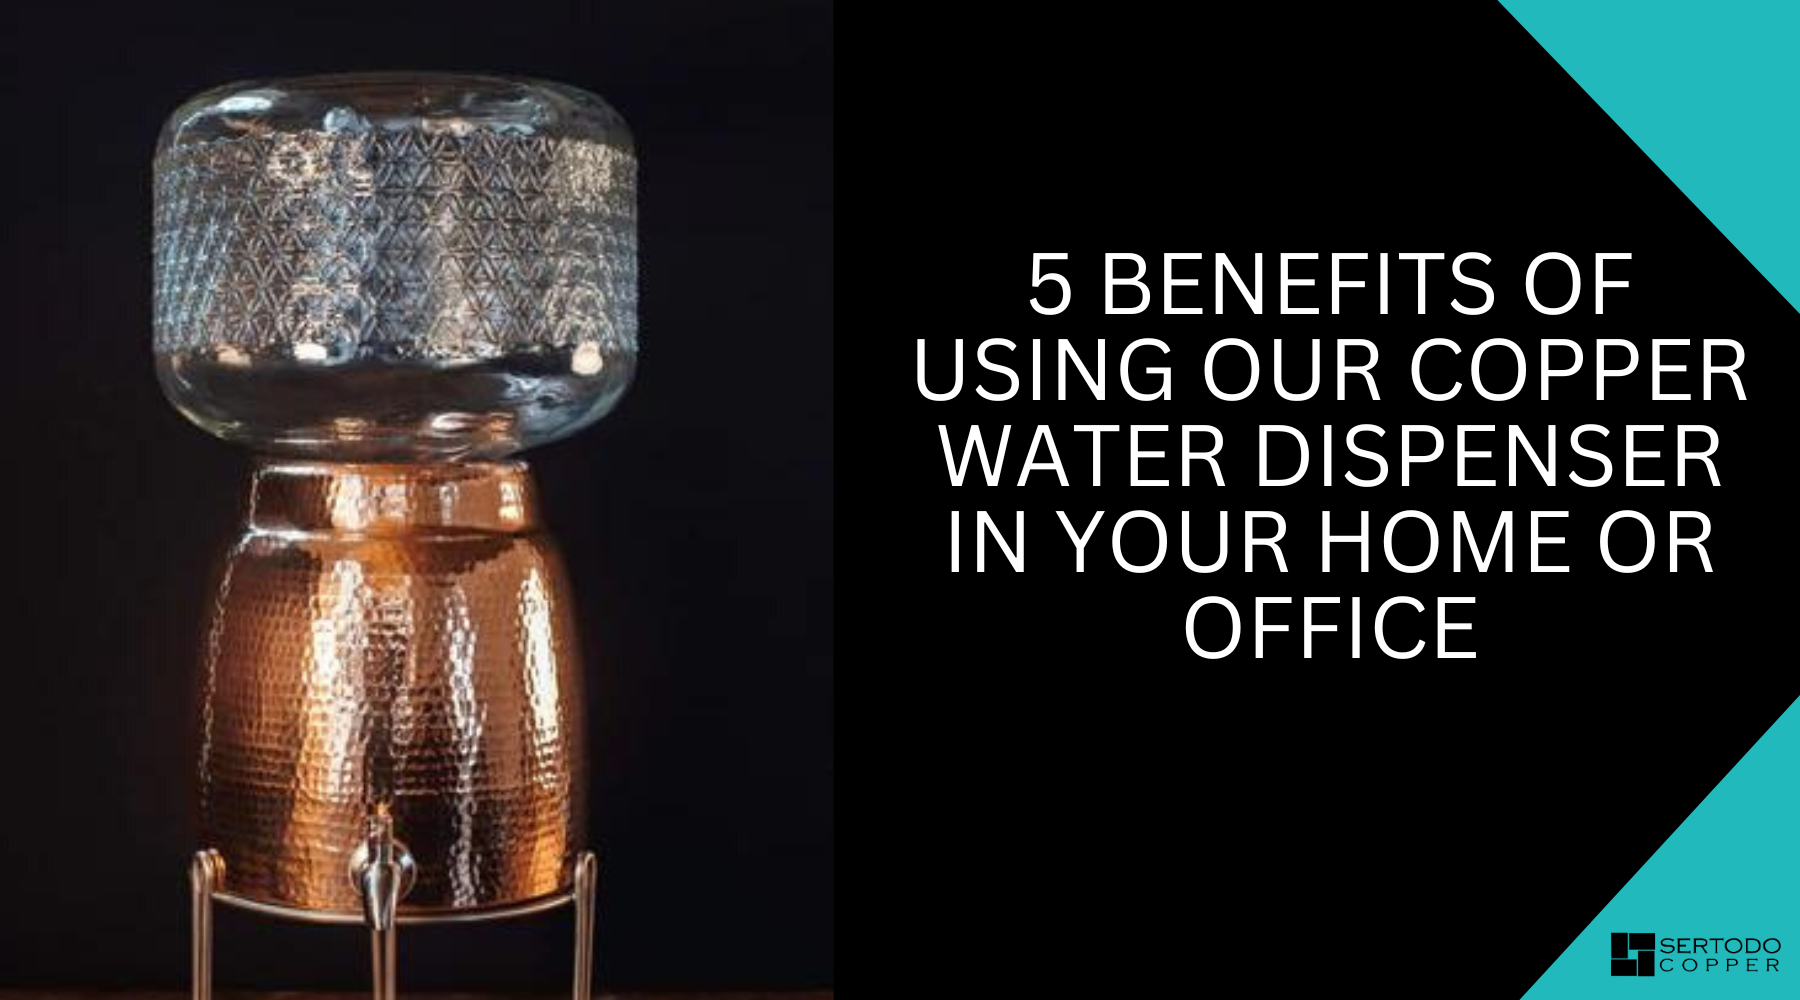 Benefits of having a copper water dispenser at home